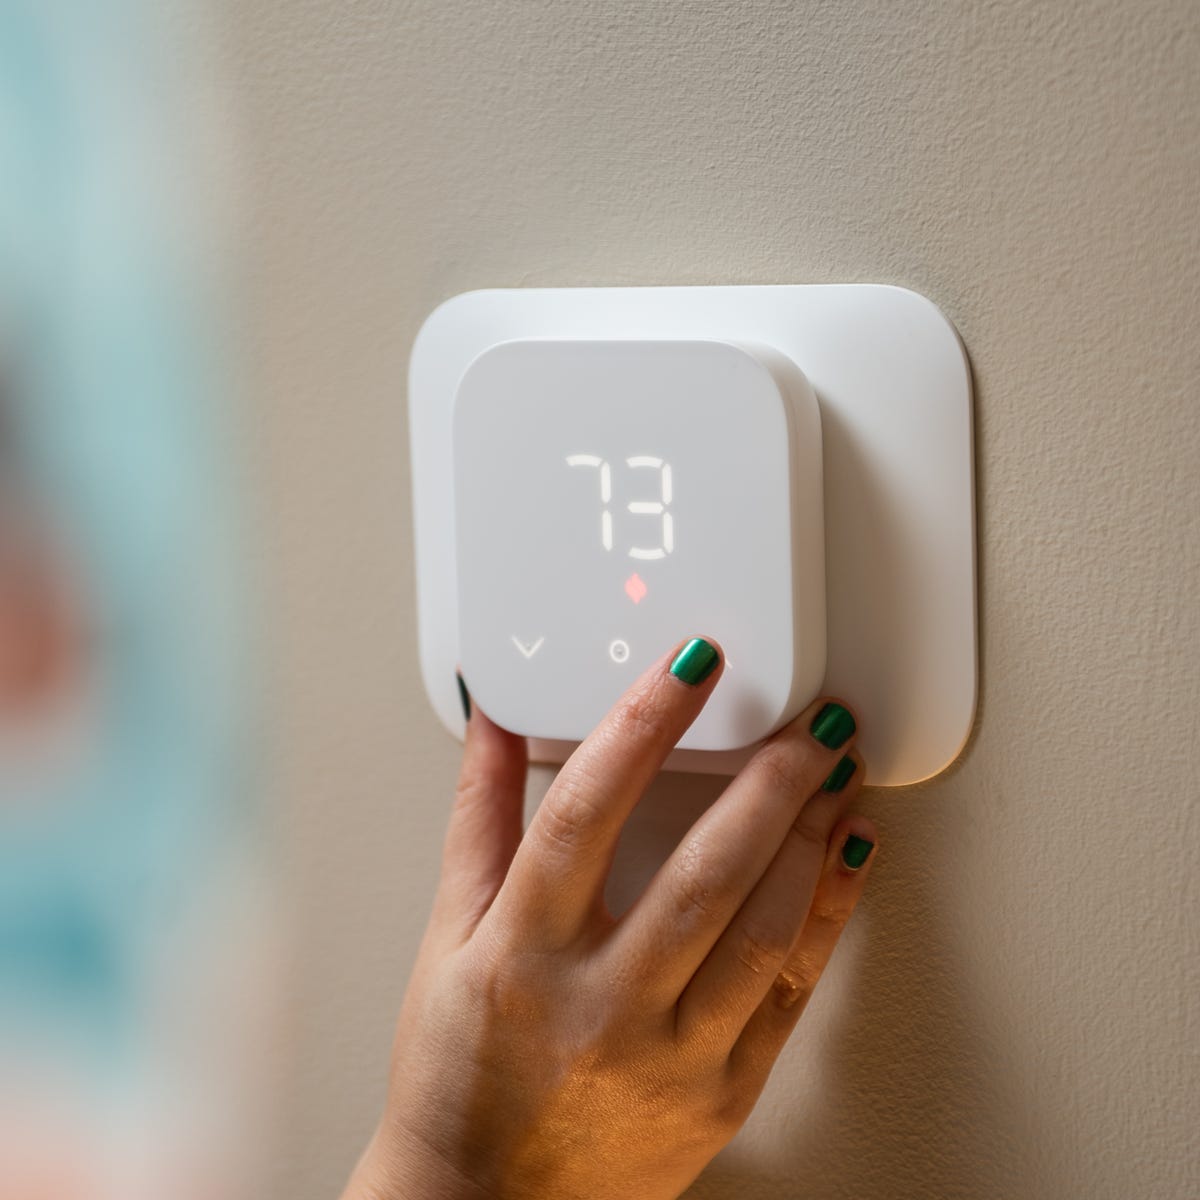 The Best and Worst Places to Install a Thermostat if You Actually